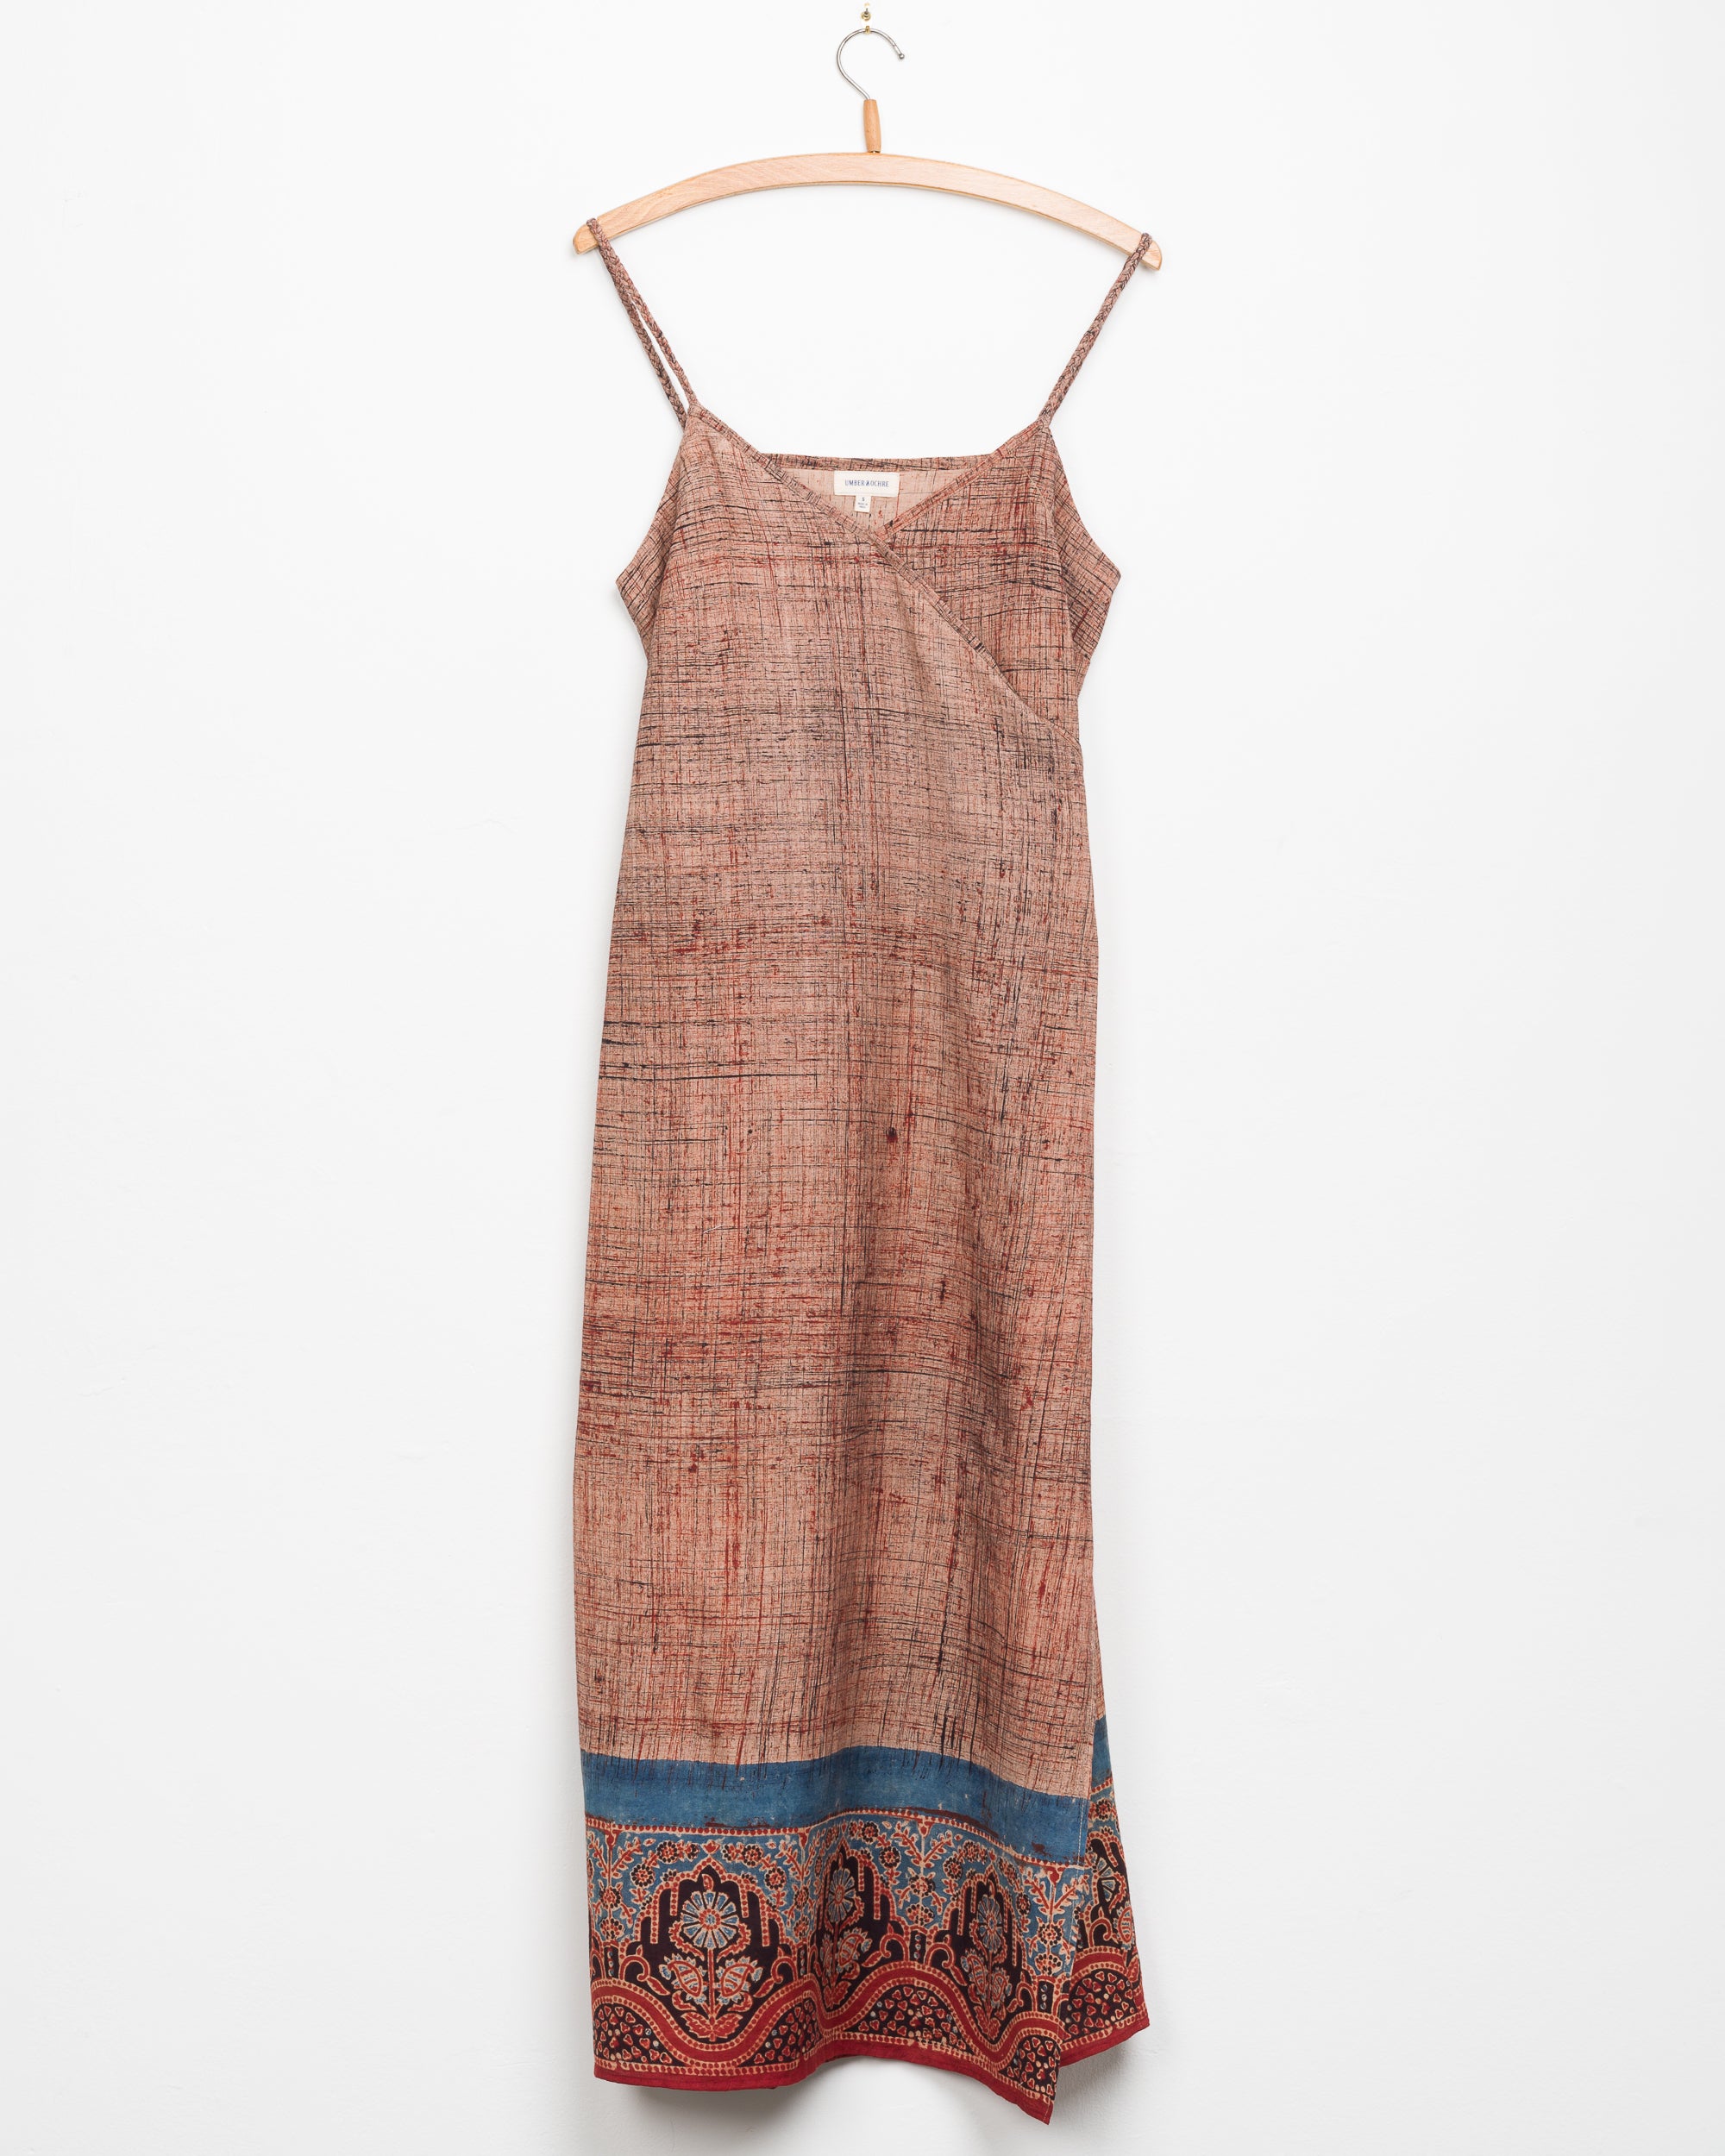 Aahana Strappy Wrap Dress in Pomegranate Brushed Border